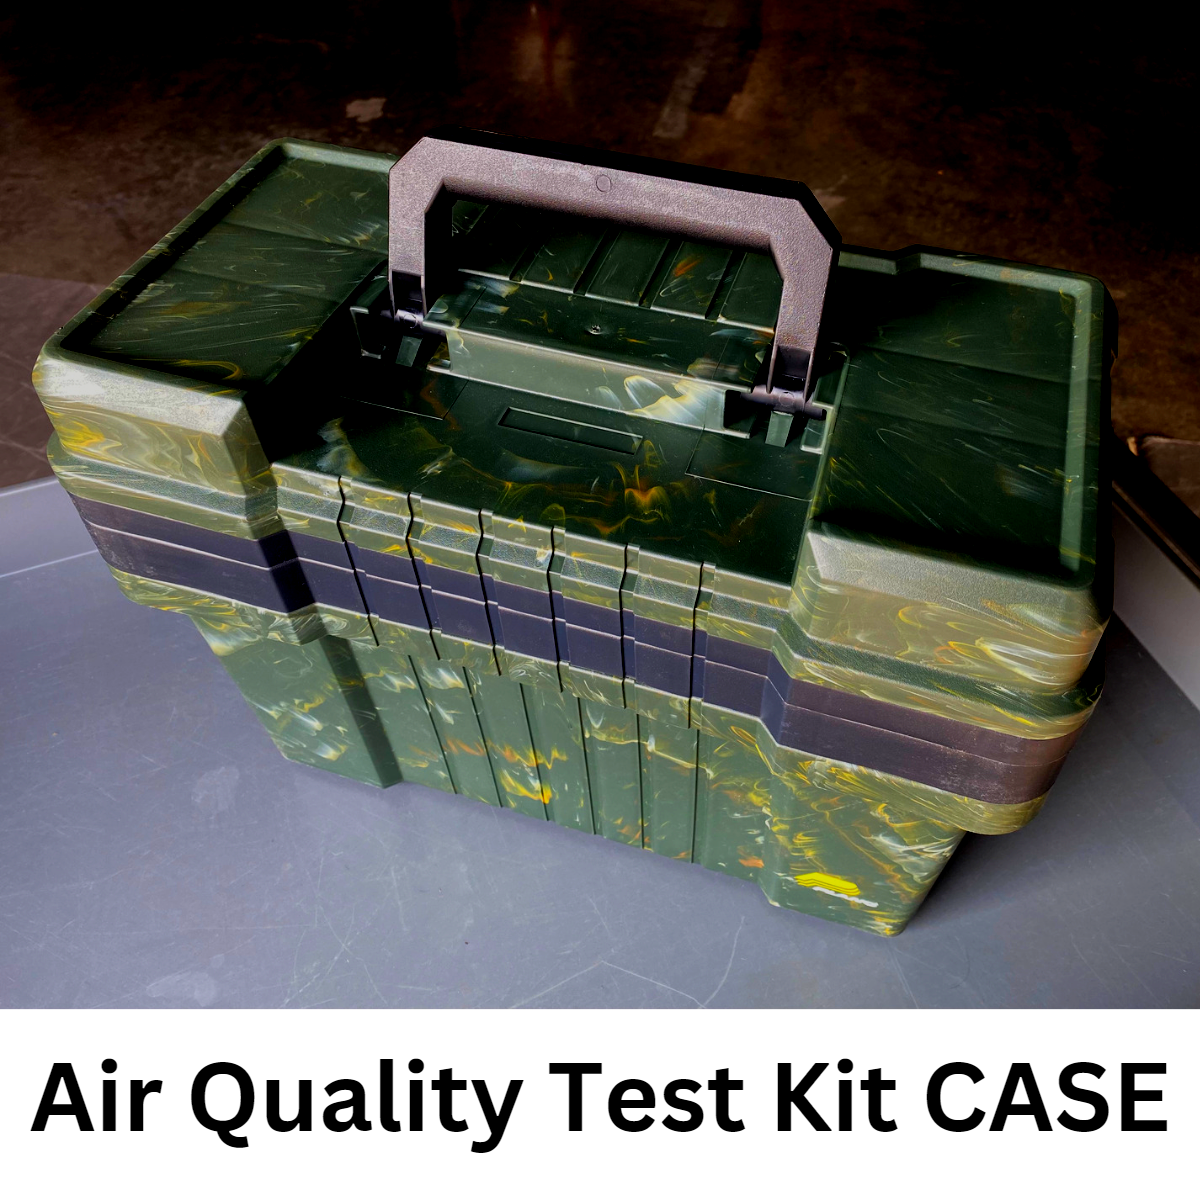 Air Quality Test Kit Storage Case  (case only)